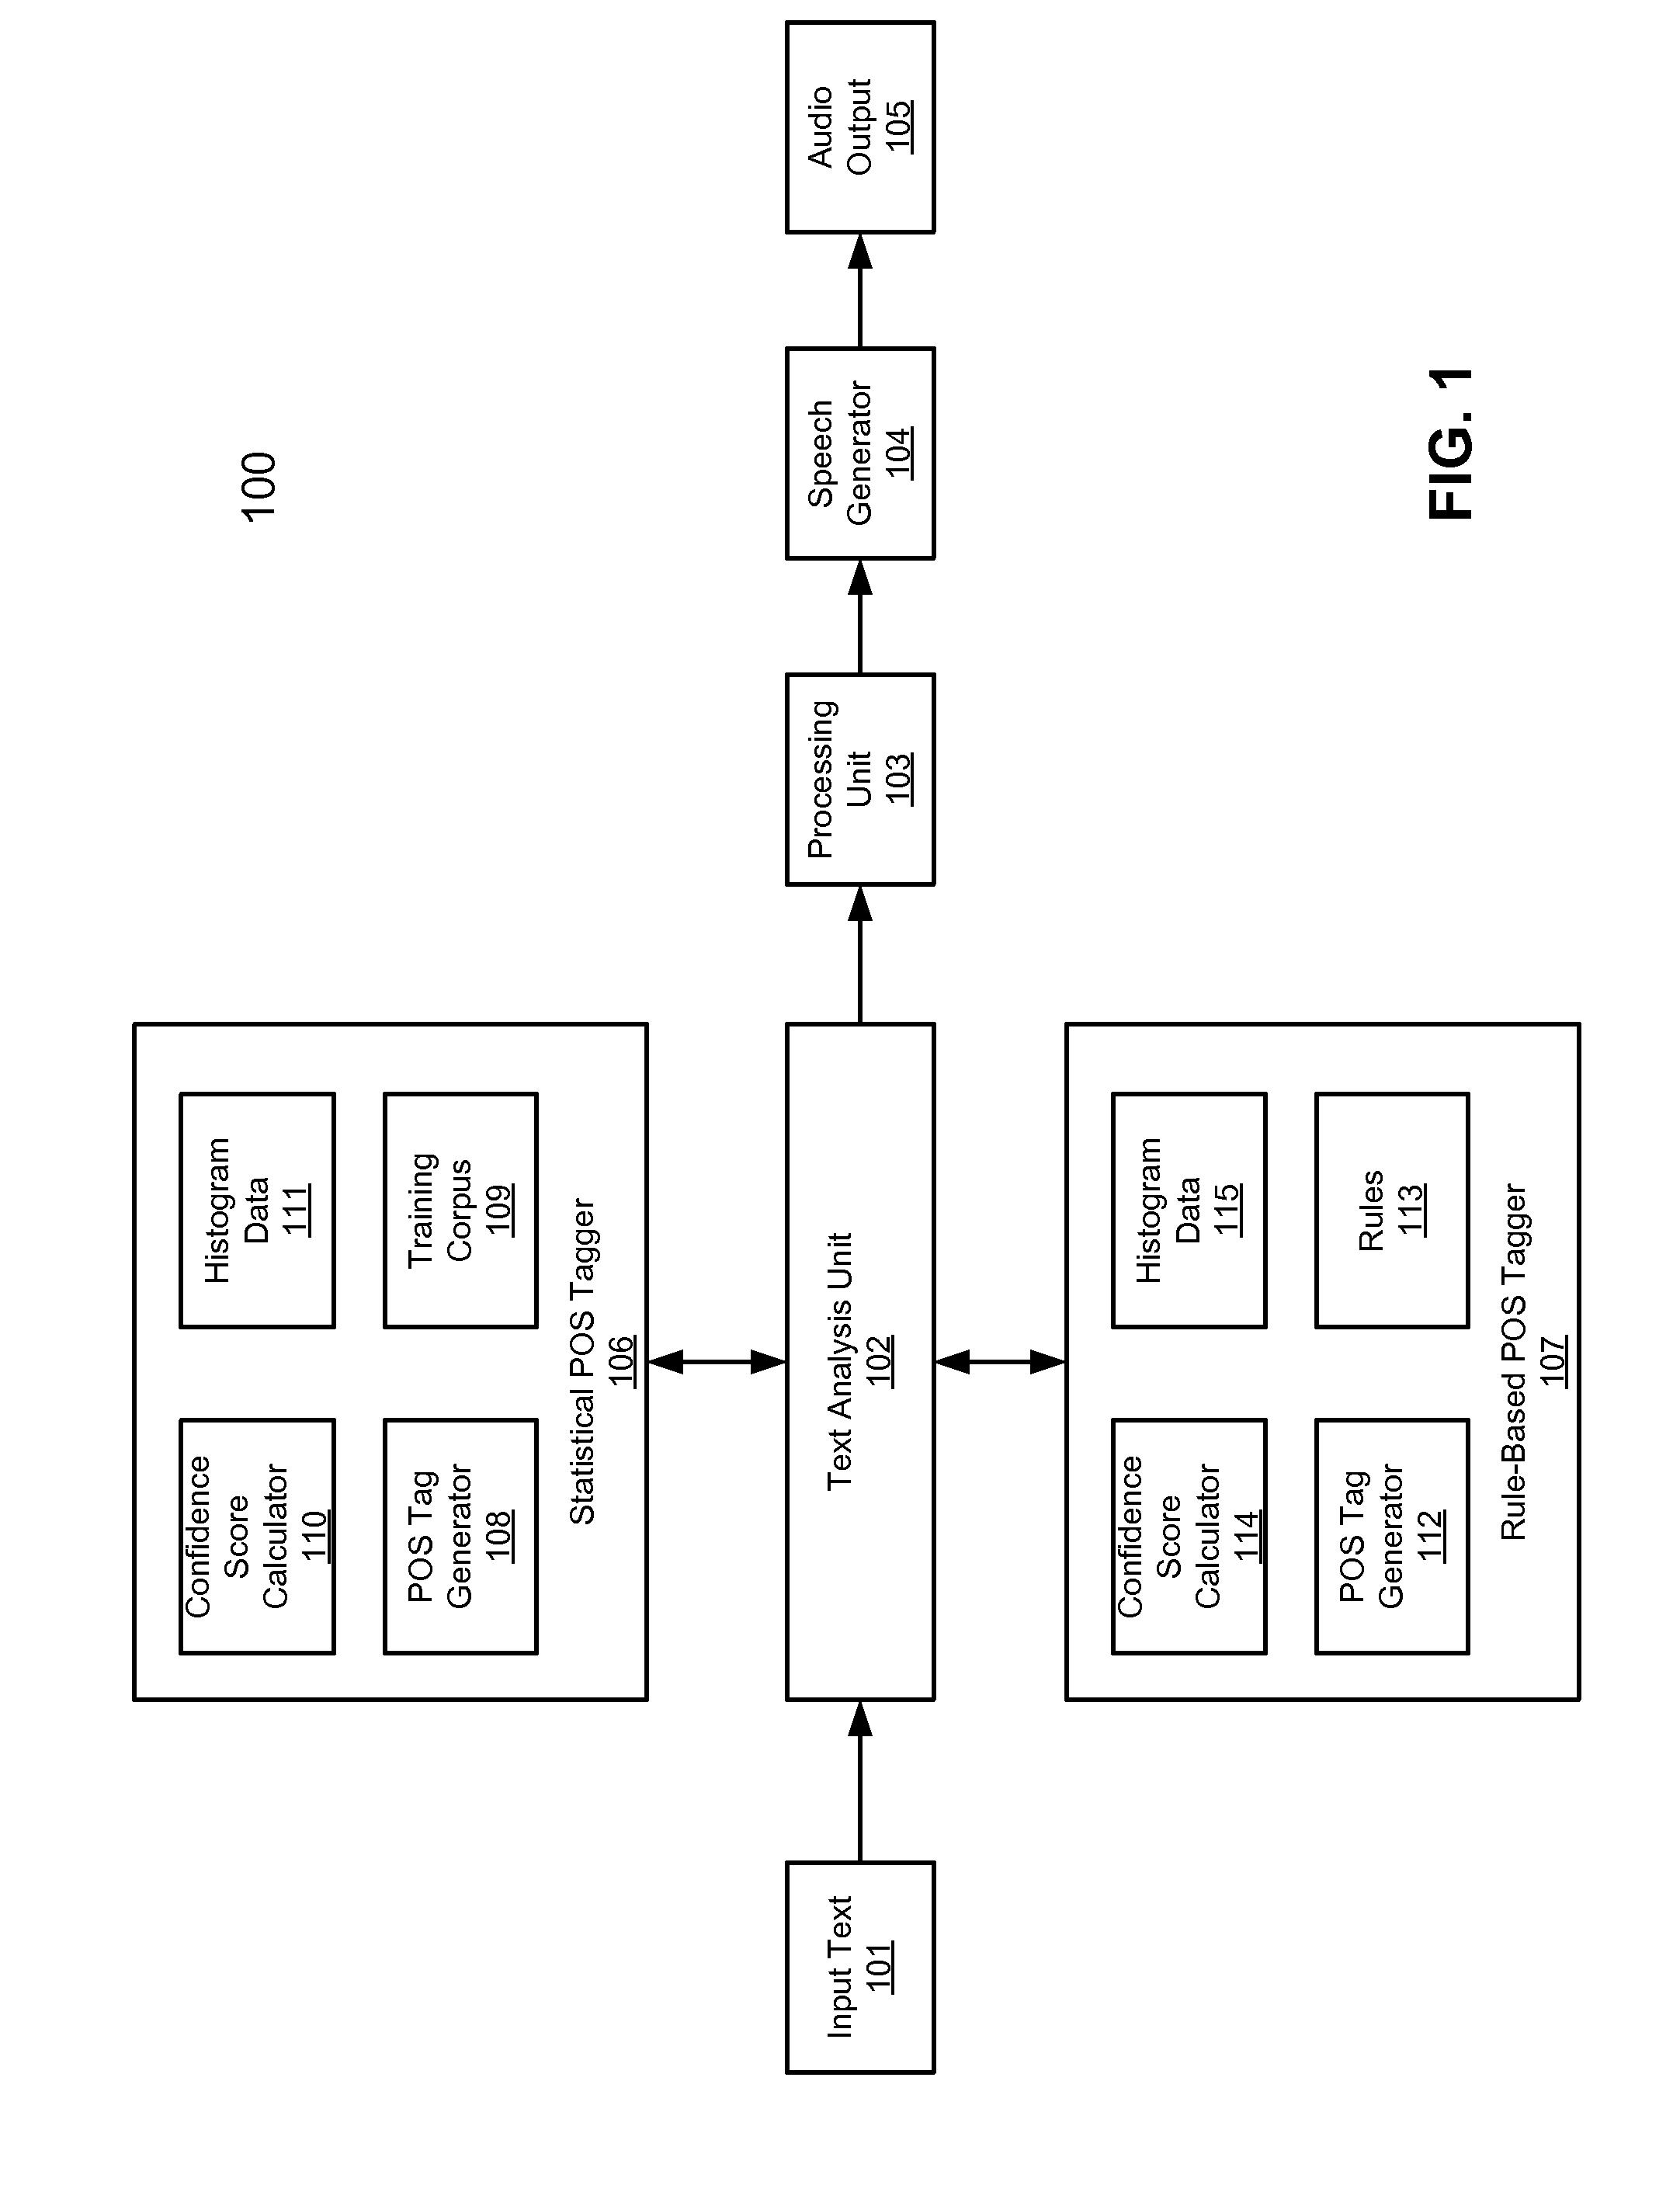 Combined statistical and rule-based part-of-speech tagging for text-to-speech synthesis